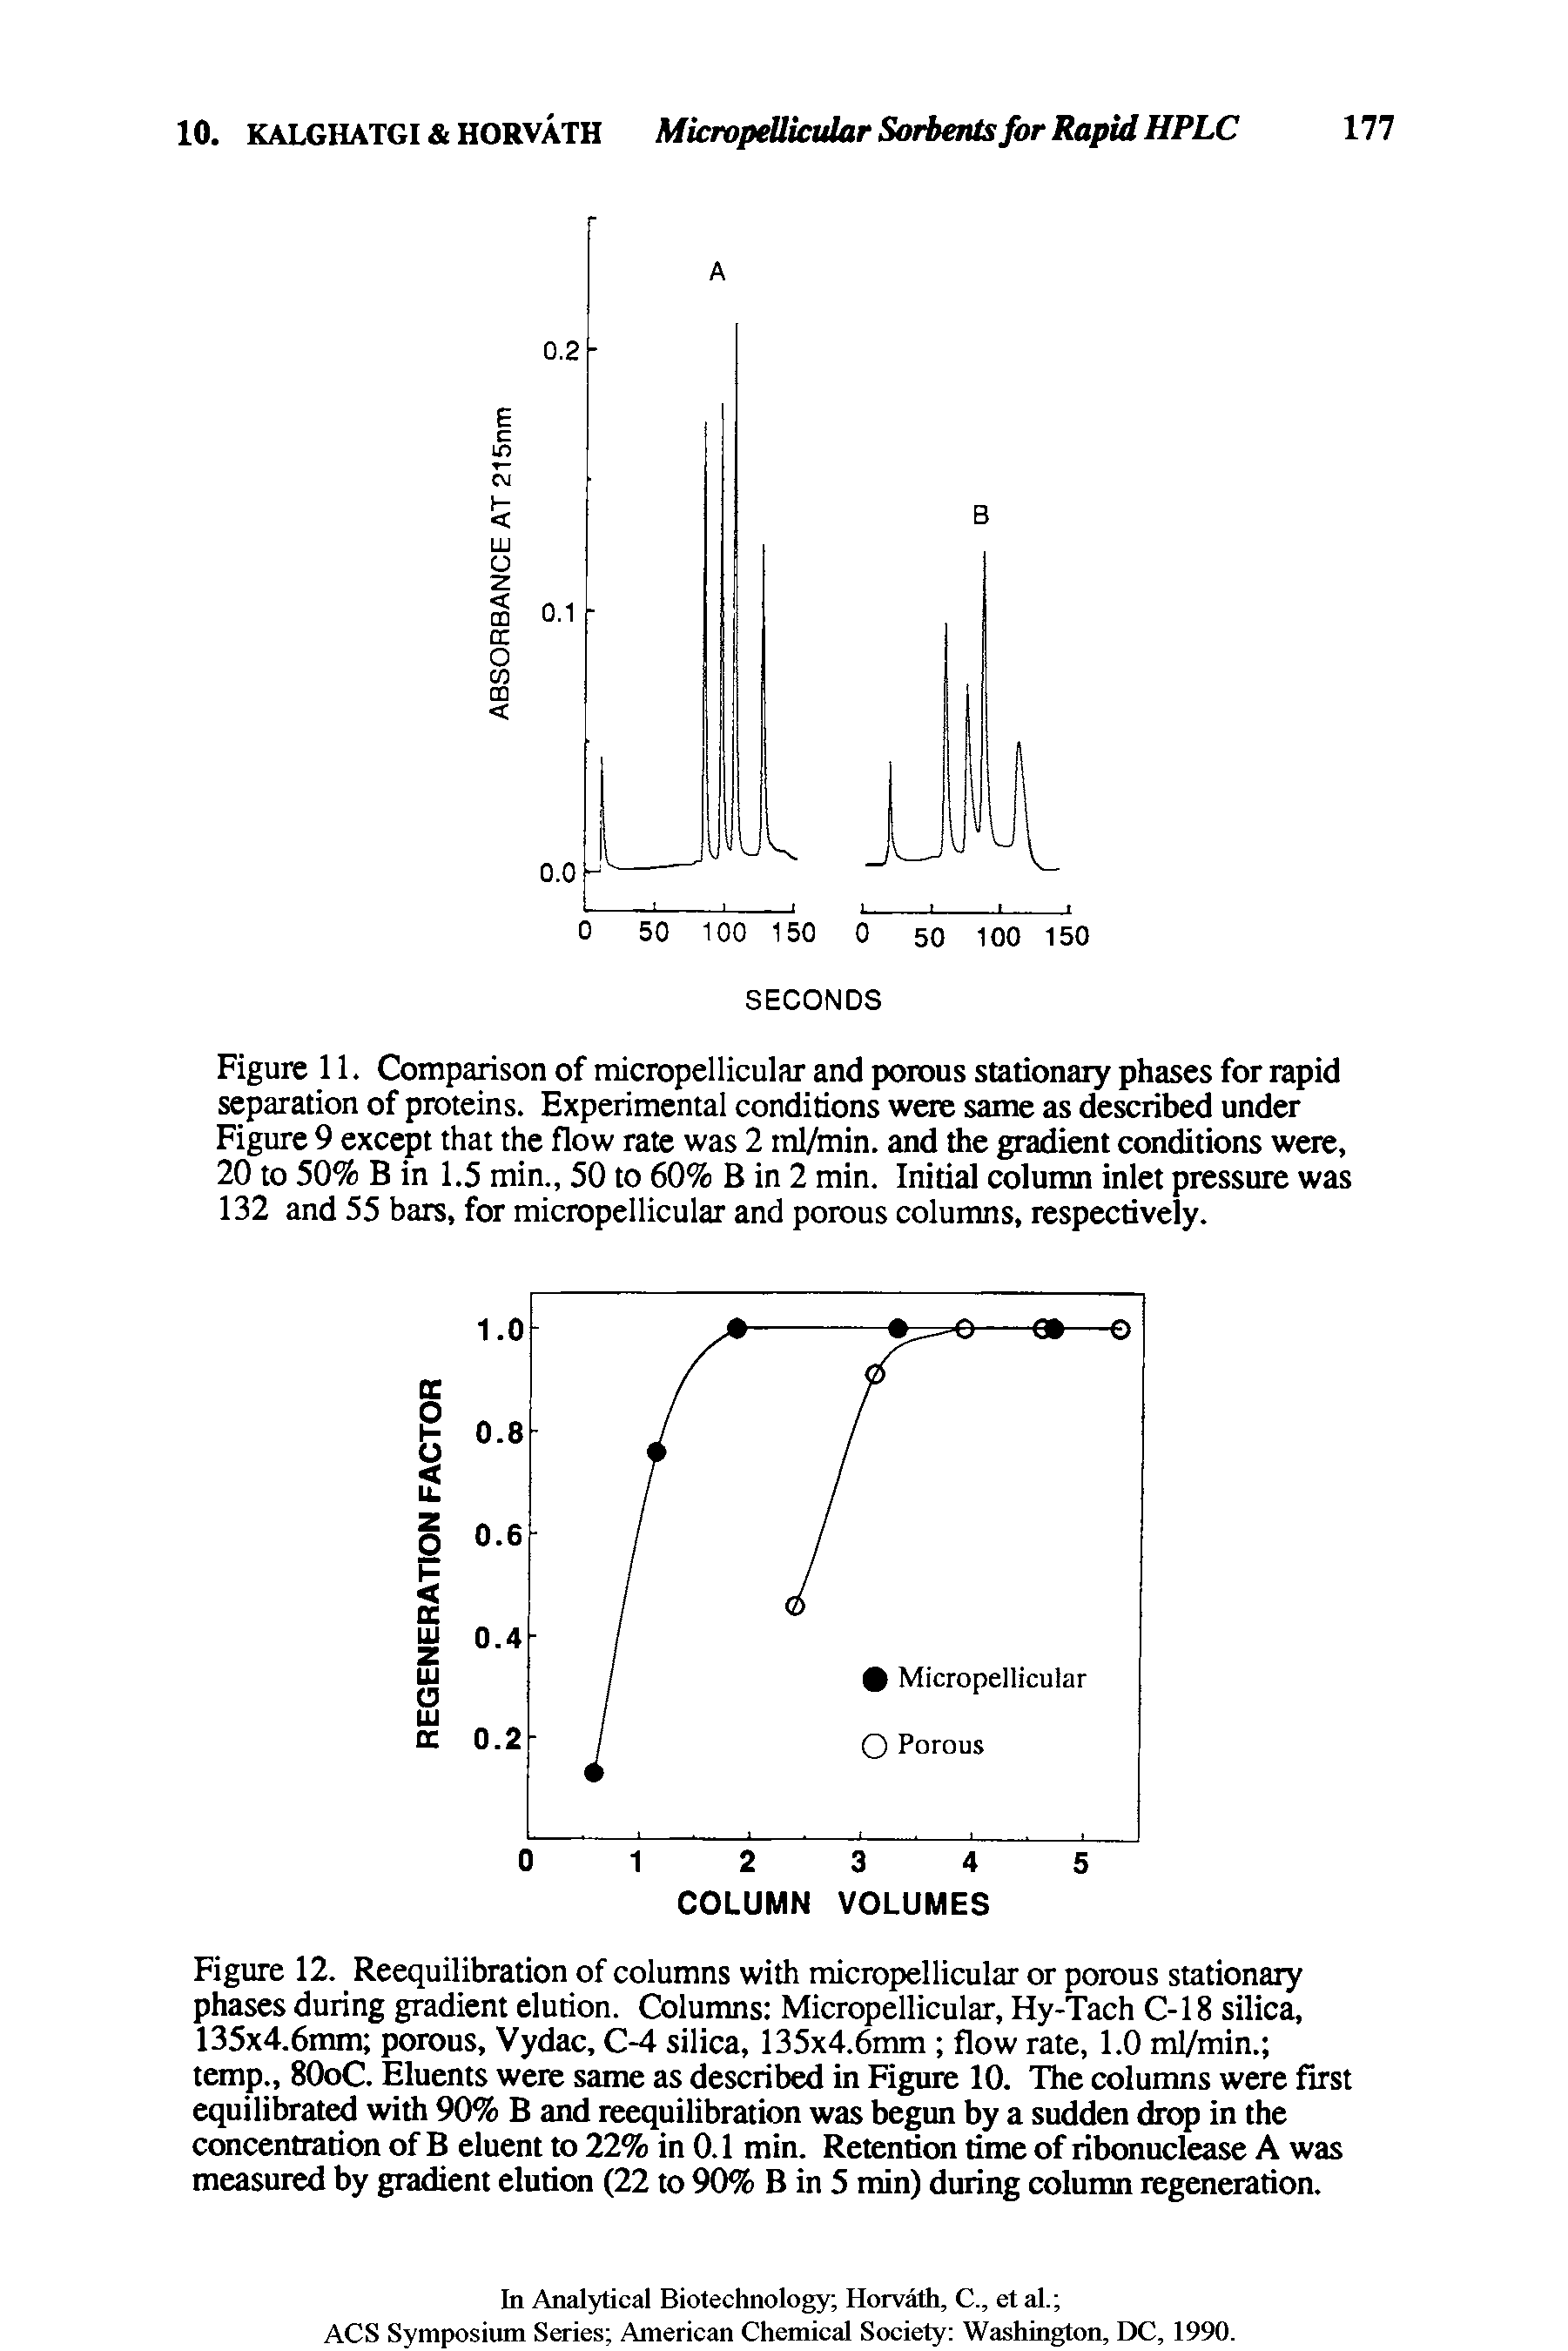 Figure 11. Comparison of micropellicular and porous stationary phases for rapid separation of proteins. Experimental conditions were same as described under Figure 9 except that the flow rate was 2 ml/min. and the gradient conditions were, 20 to 50% B in 1.5 min., 50 to 60% B in 2 min. Initial column inlet pressure was 132 and 55 bars, for micropellicular and porous columns, respectively.